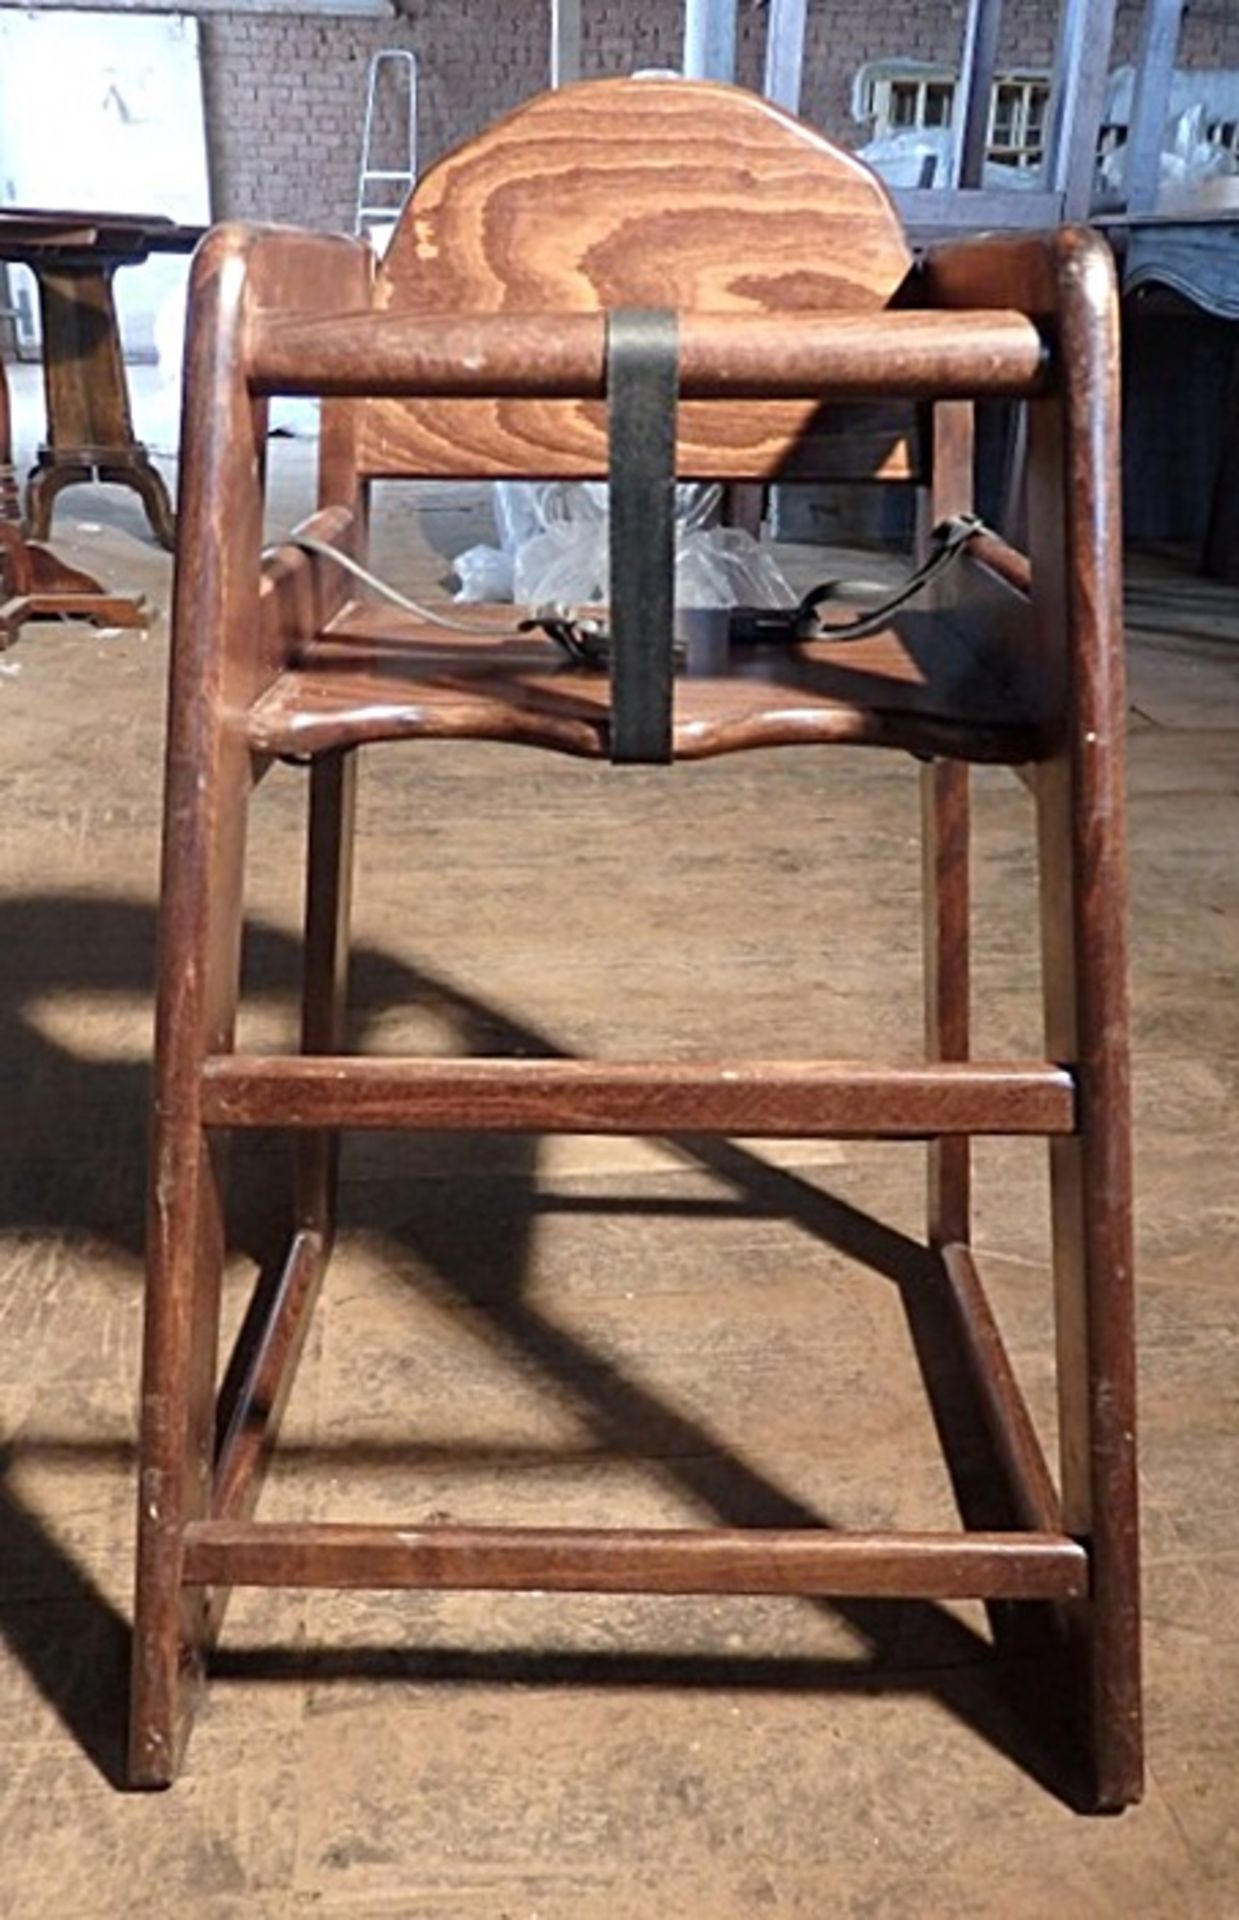 1 x Solid Wood Childs High Chair - All Recently Taken From A Bar & Restaurant Environment - - Image 2 of 8